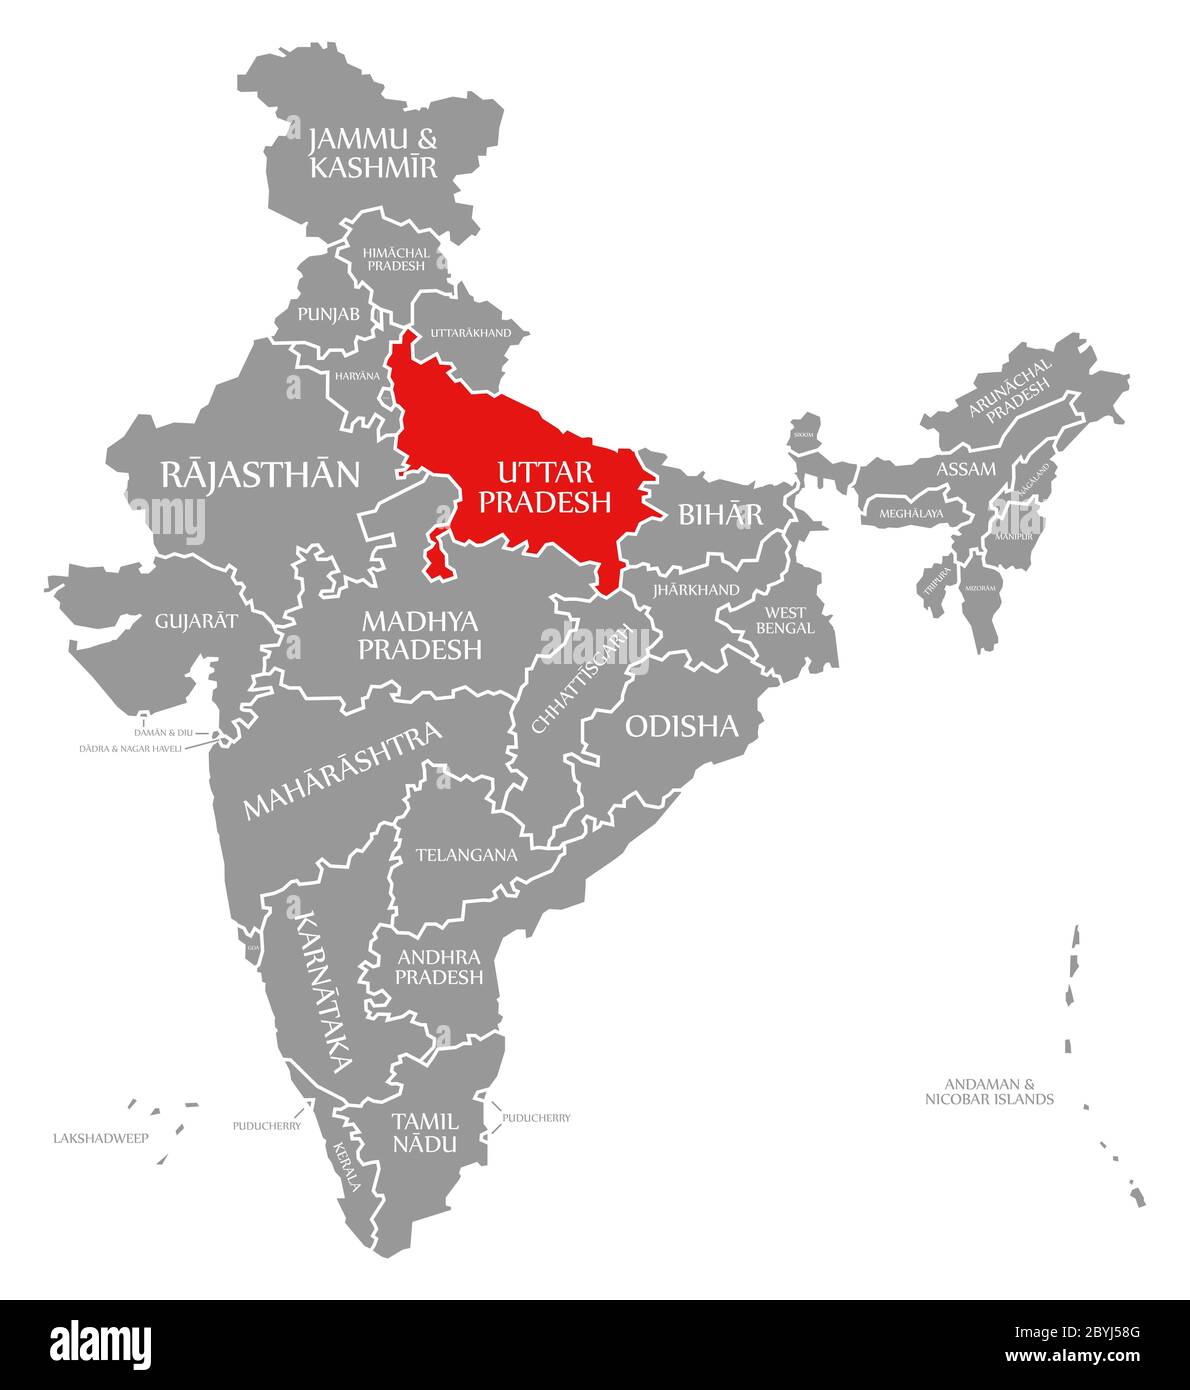 Uttar Pradesh red highlighted in map of India Stock Photo